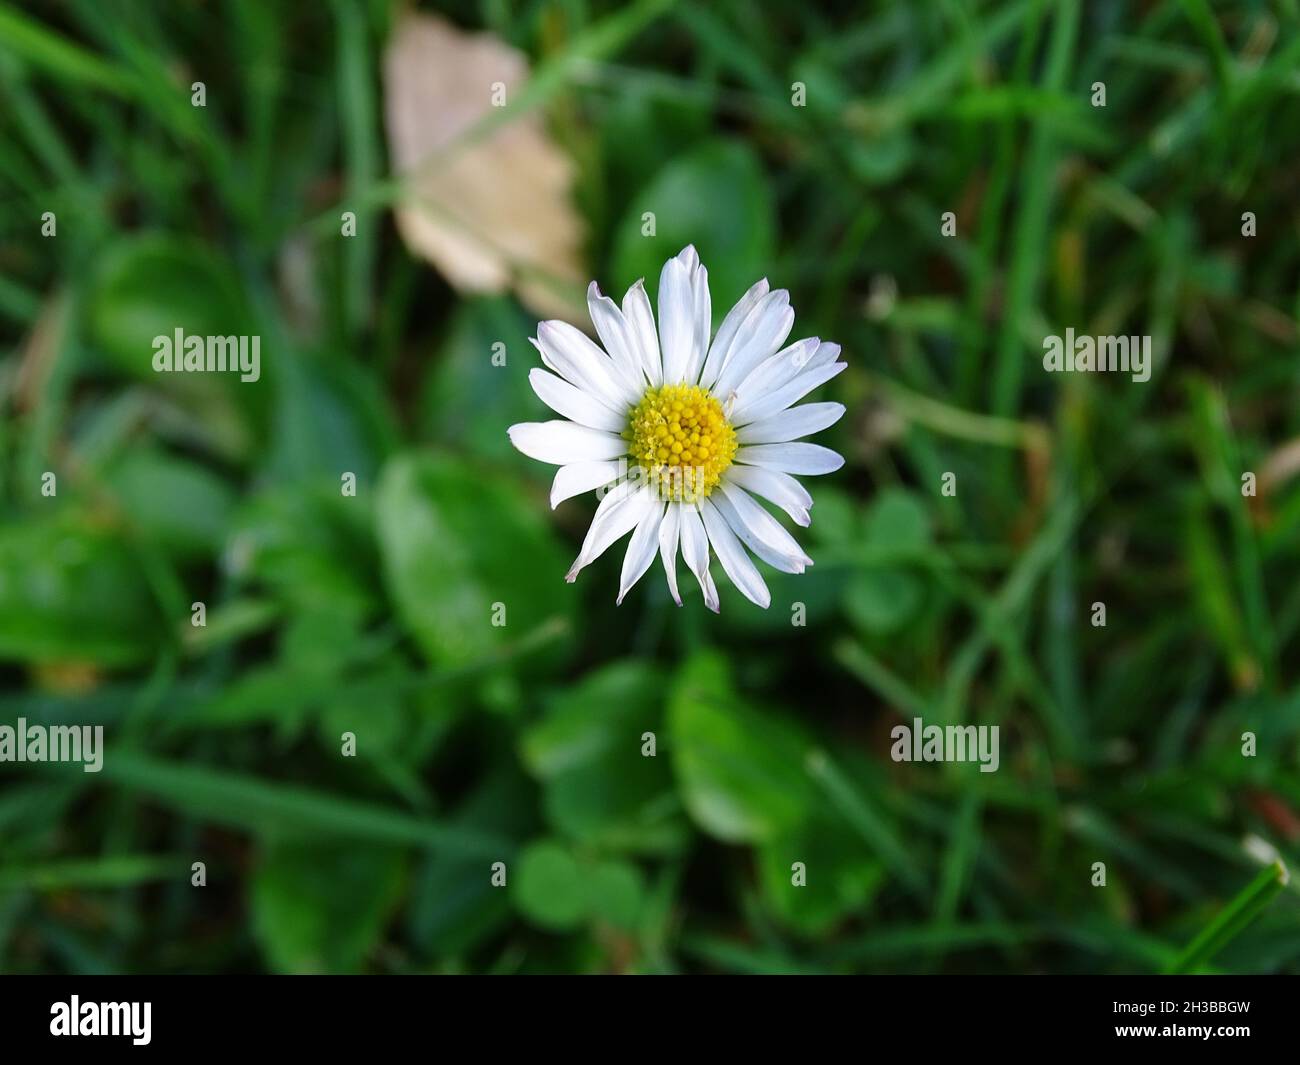 Flower on the grass . Stock Photo